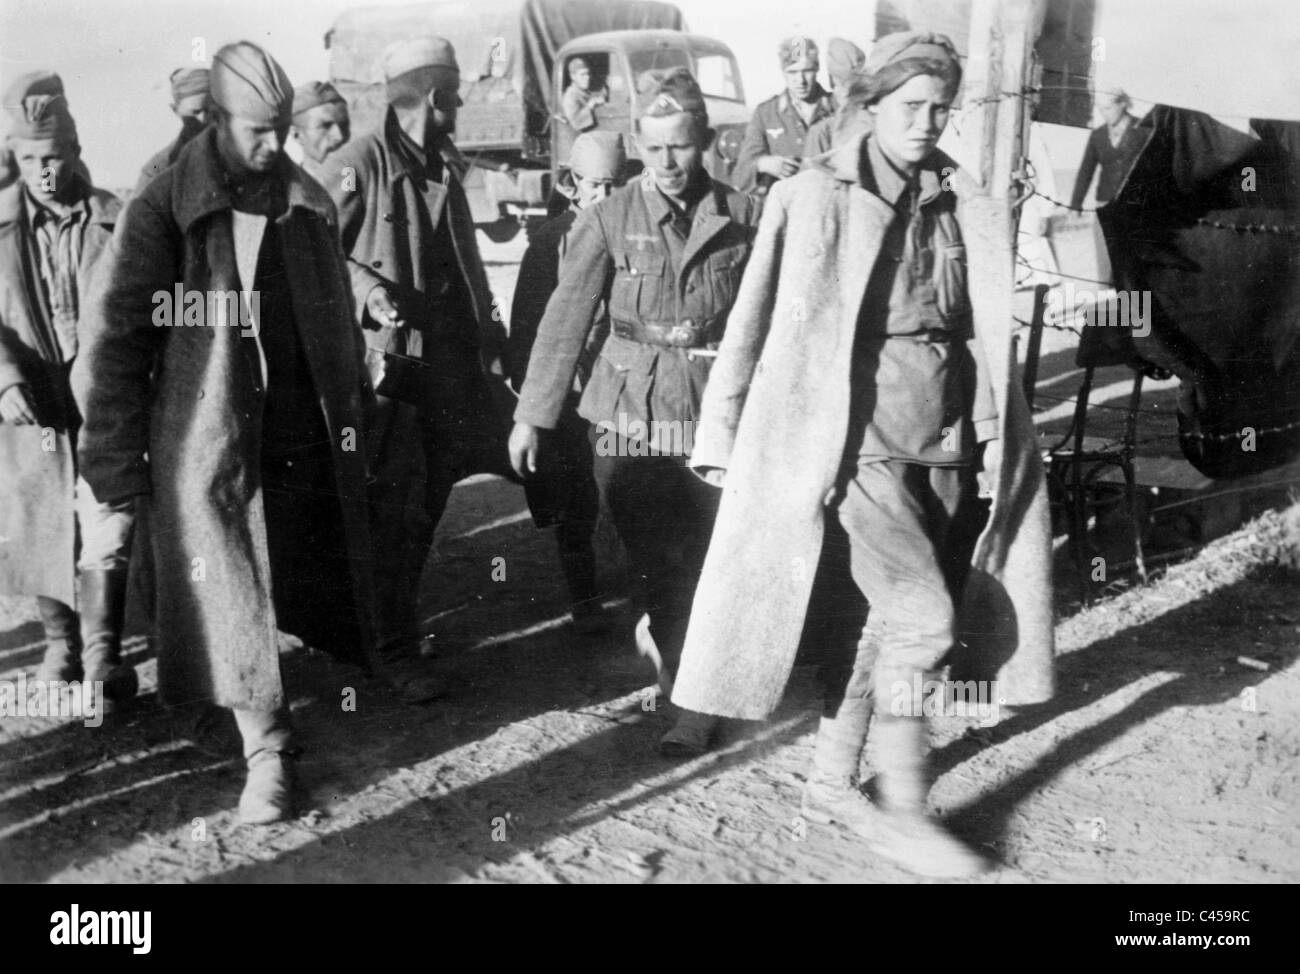 Soviet prisoners of war on the Eastern front, 1942 Stock Photo